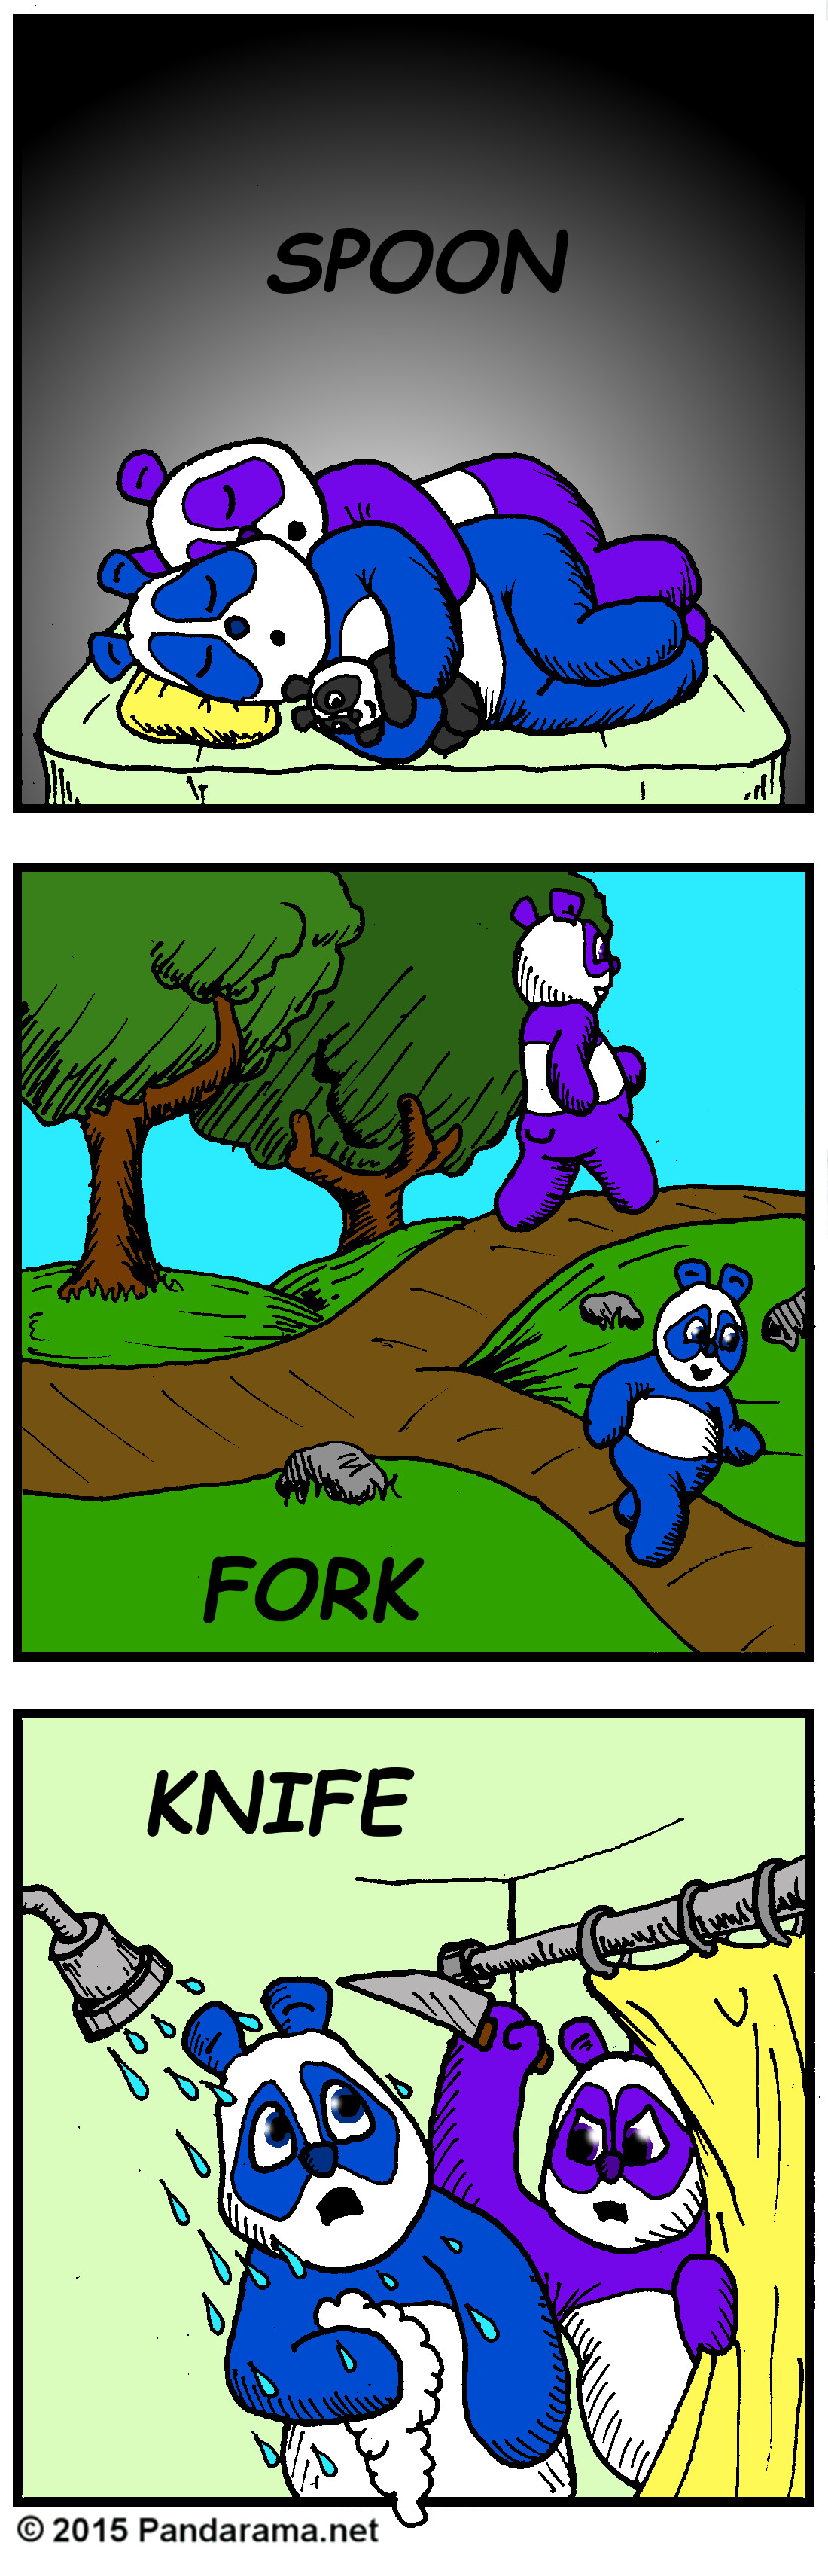 Pandarama cartoon of Pandas spooning, Pandas splitting at of Fork in the road, and a panda knifing the other.